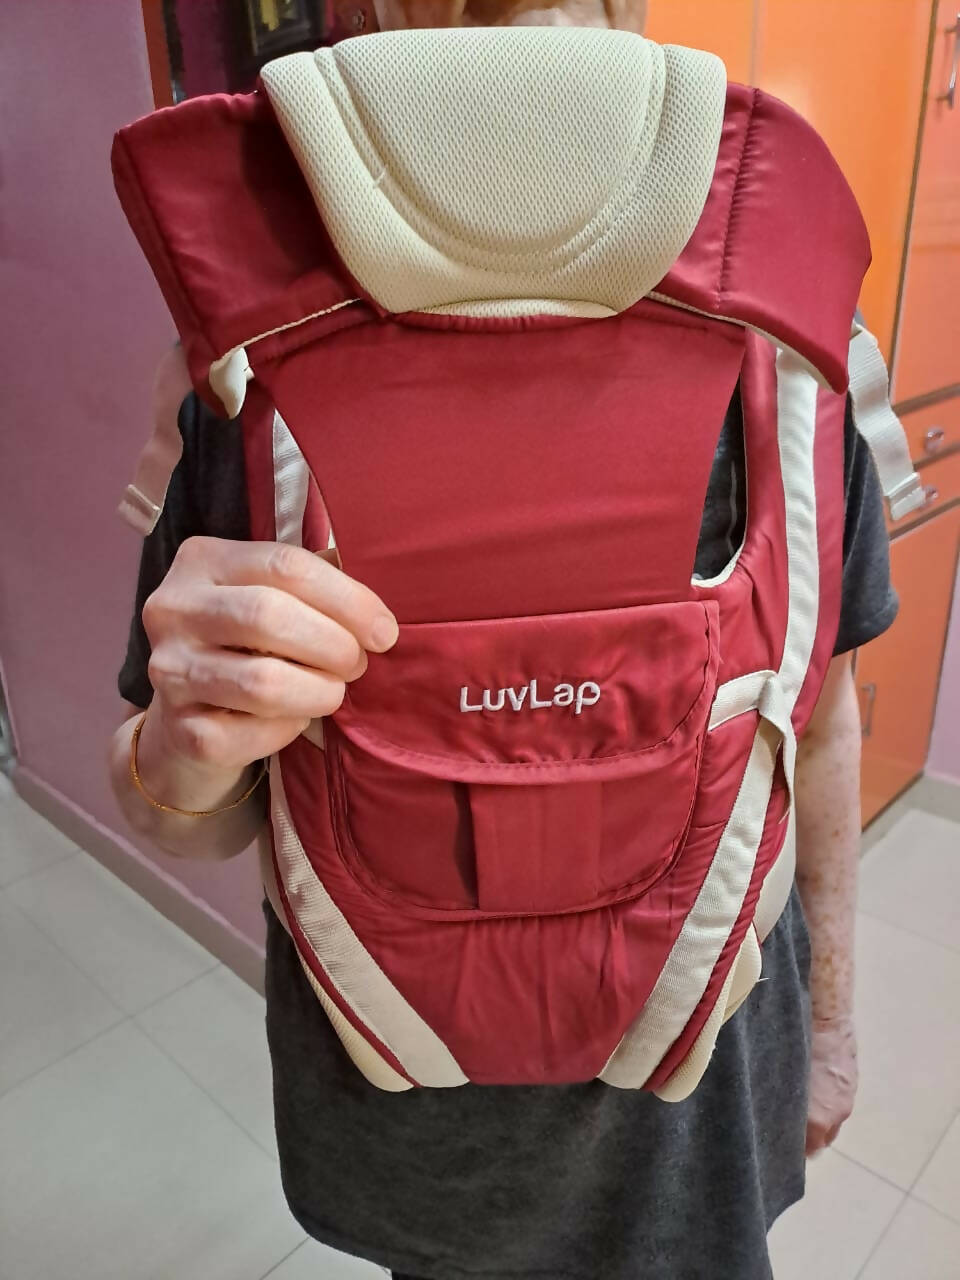 LUVLAP Baby Carrier